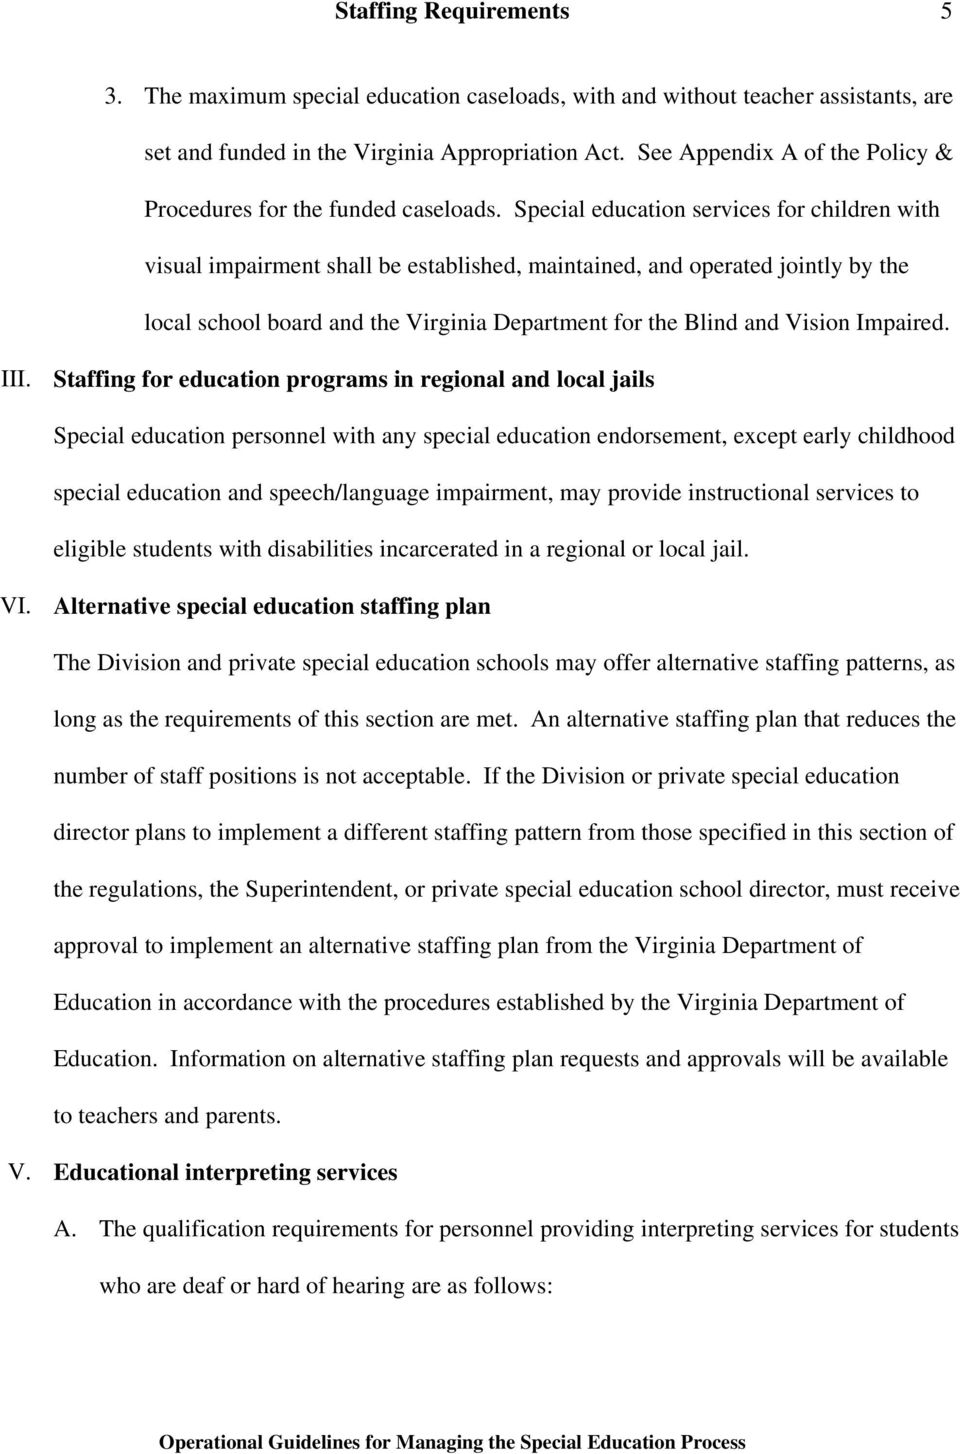 Special education services for children with visual impairment shall be established, maintained, and operated jointly by the local school board and the Virginia Department for the Blind and Vision